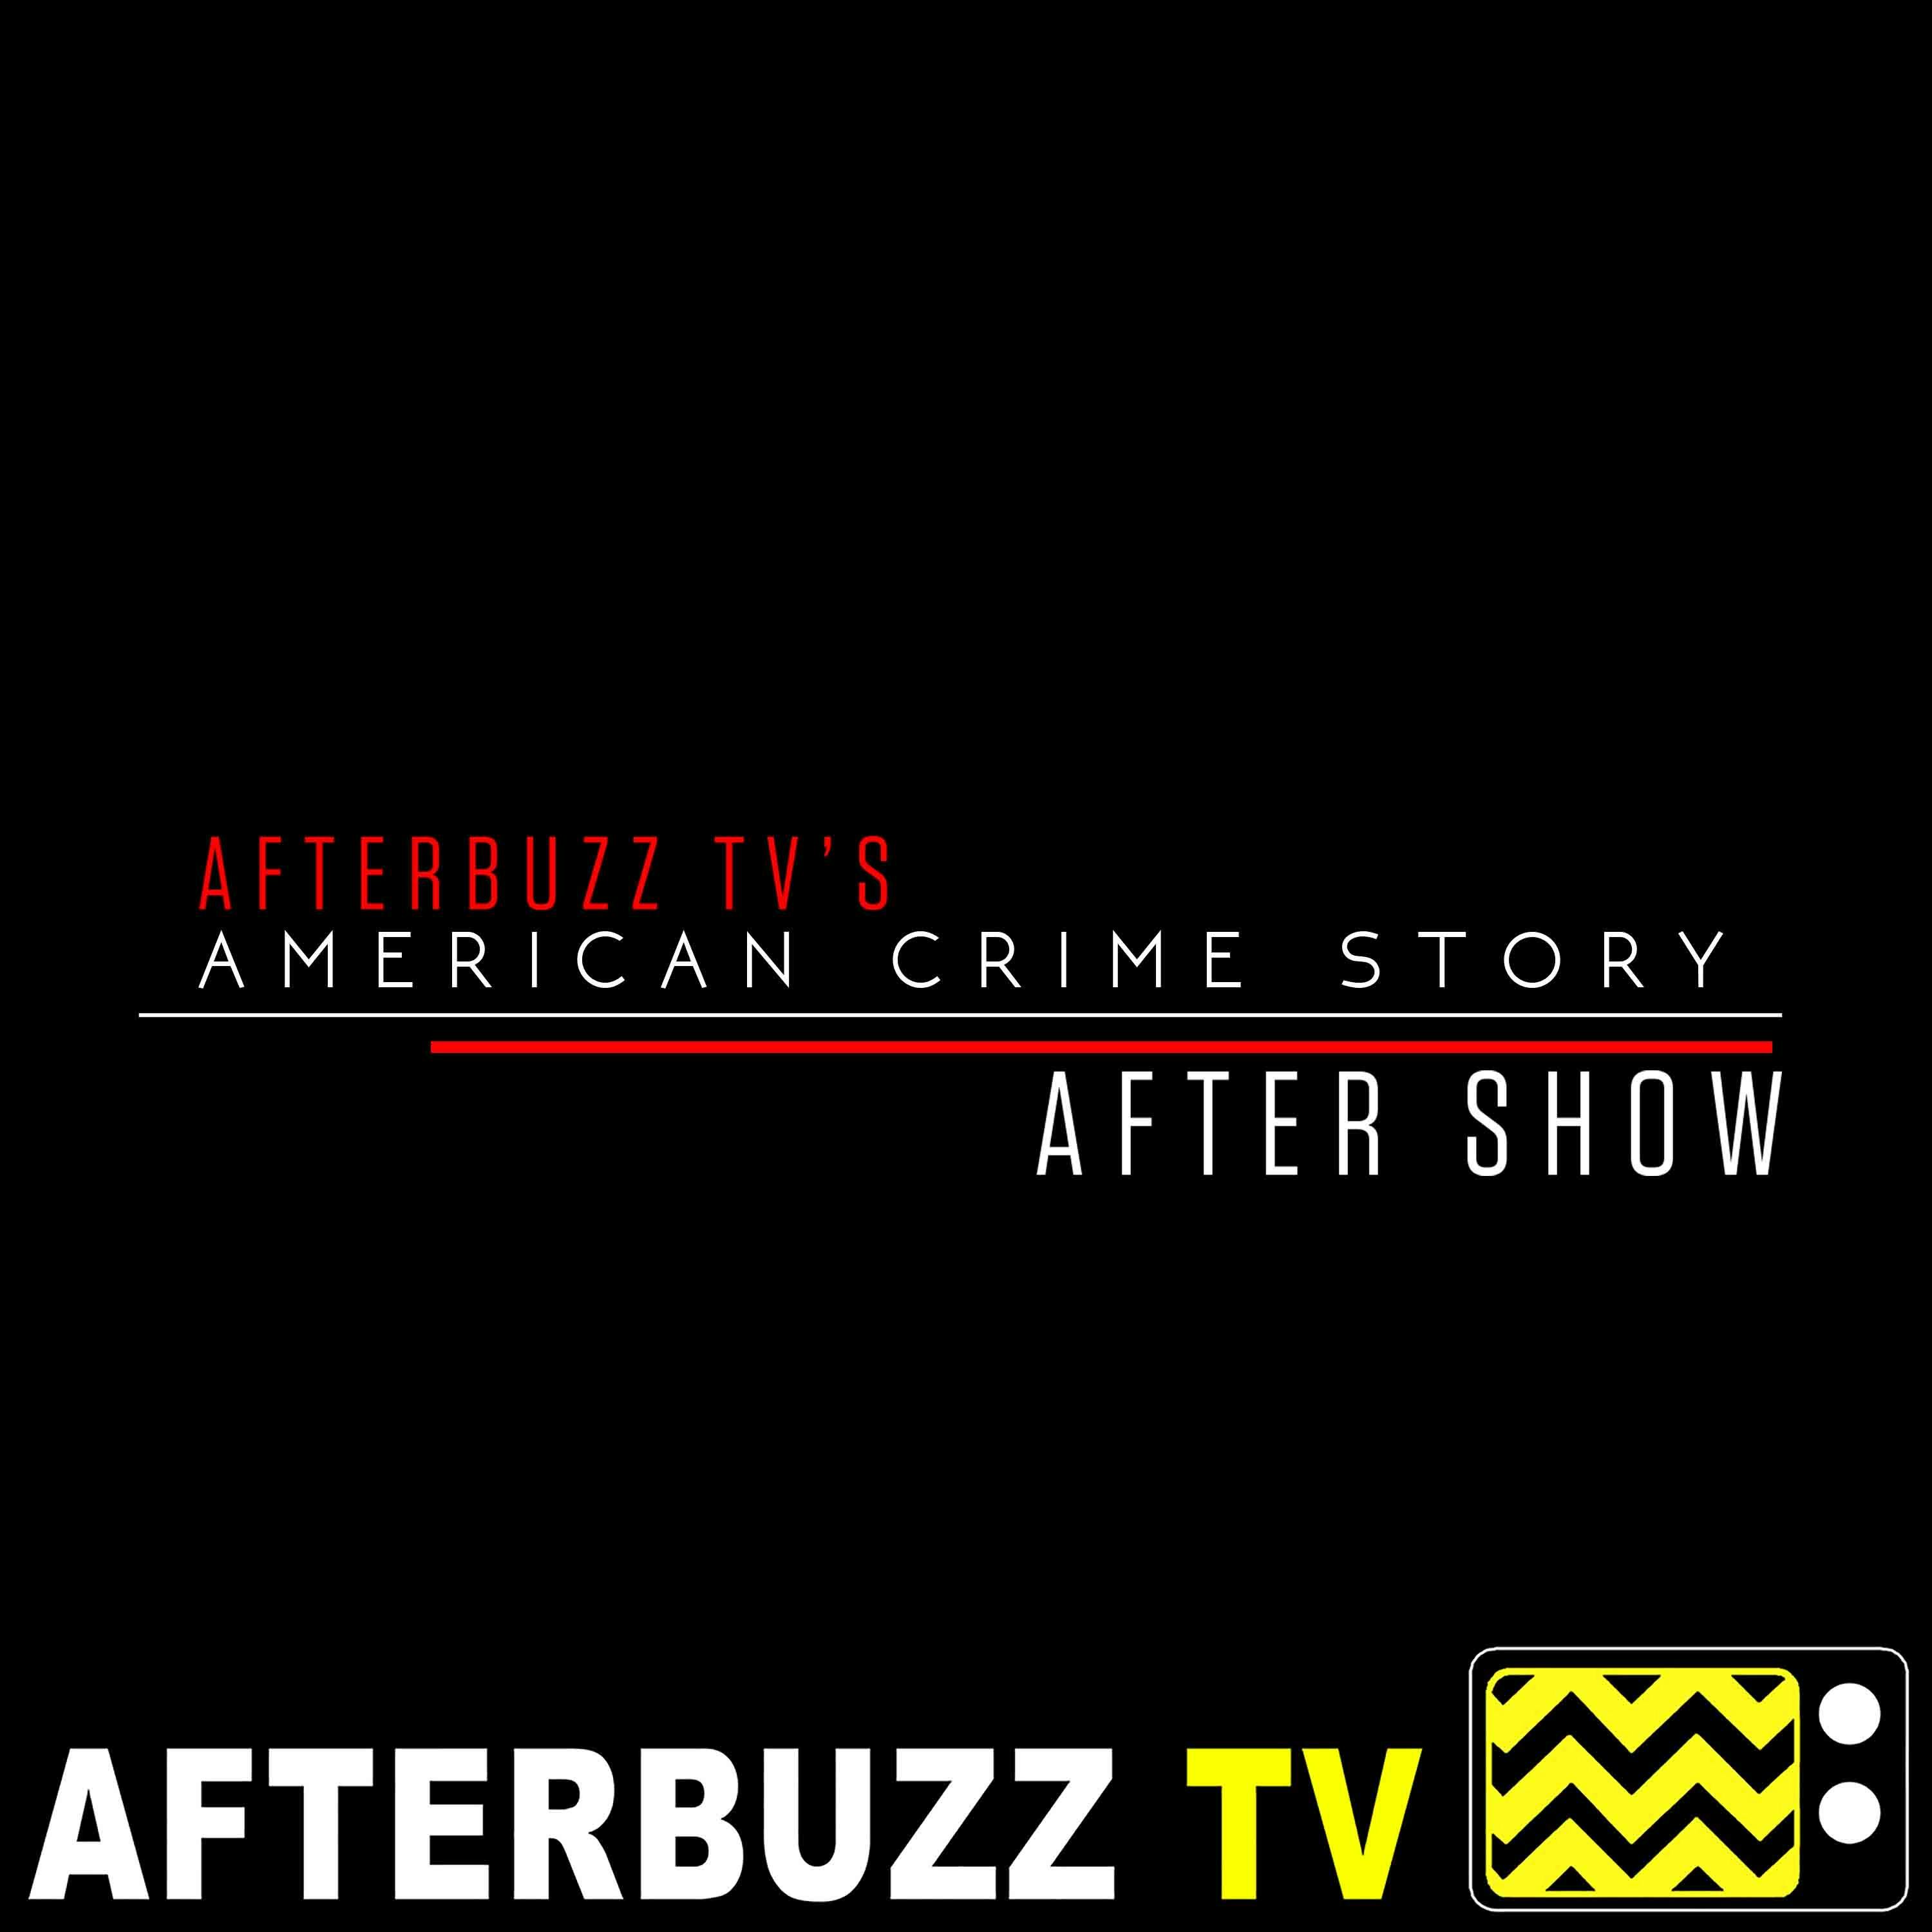 The People vs OJ Simpson | Keesha Sharp Guests on 100 Percent Not Guilty E:4 | AfterBuzz TV AfterShow